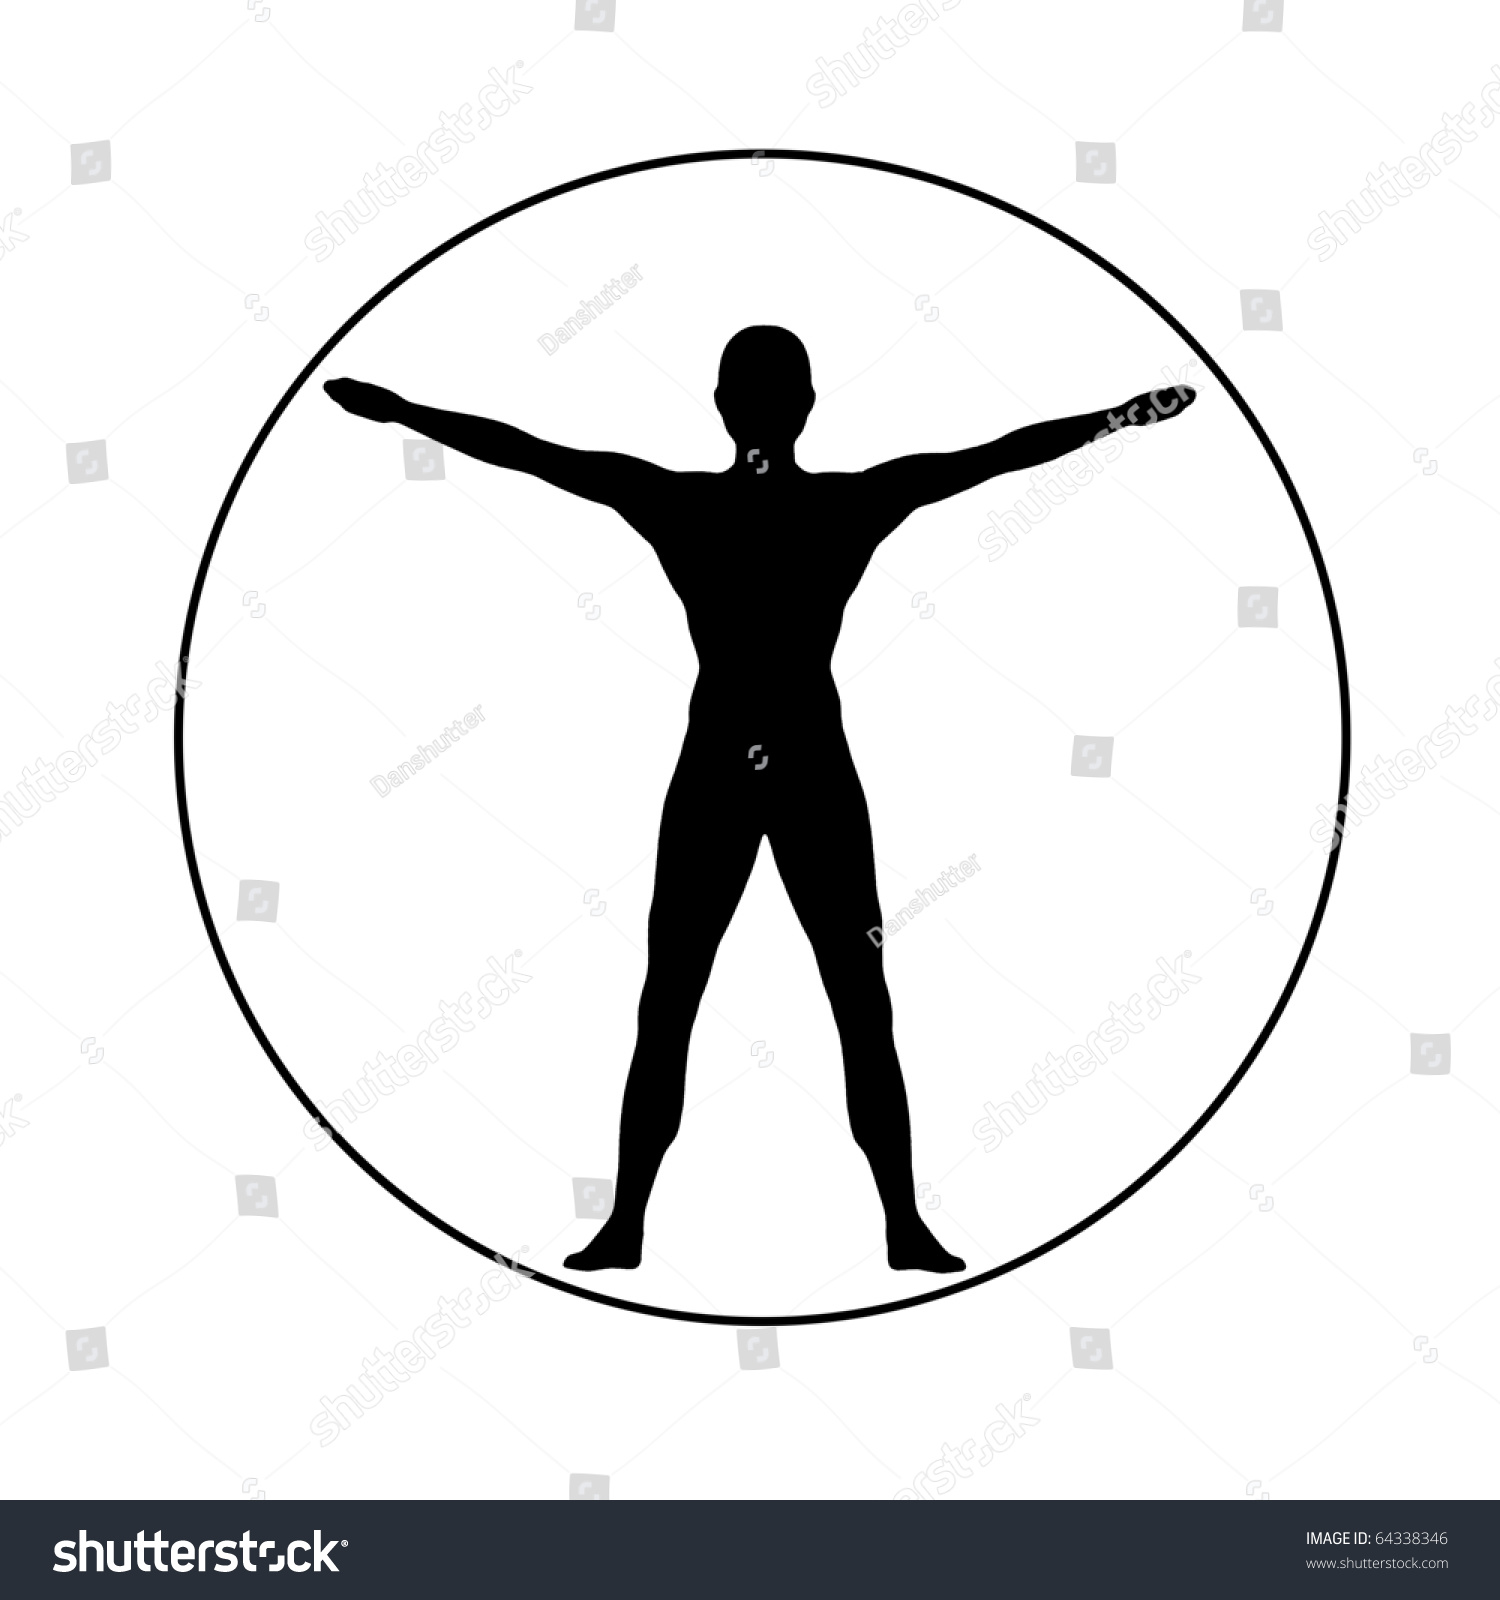 Silhouette Of A Powerful Man Spreading Arms And Legs In A Circle Like